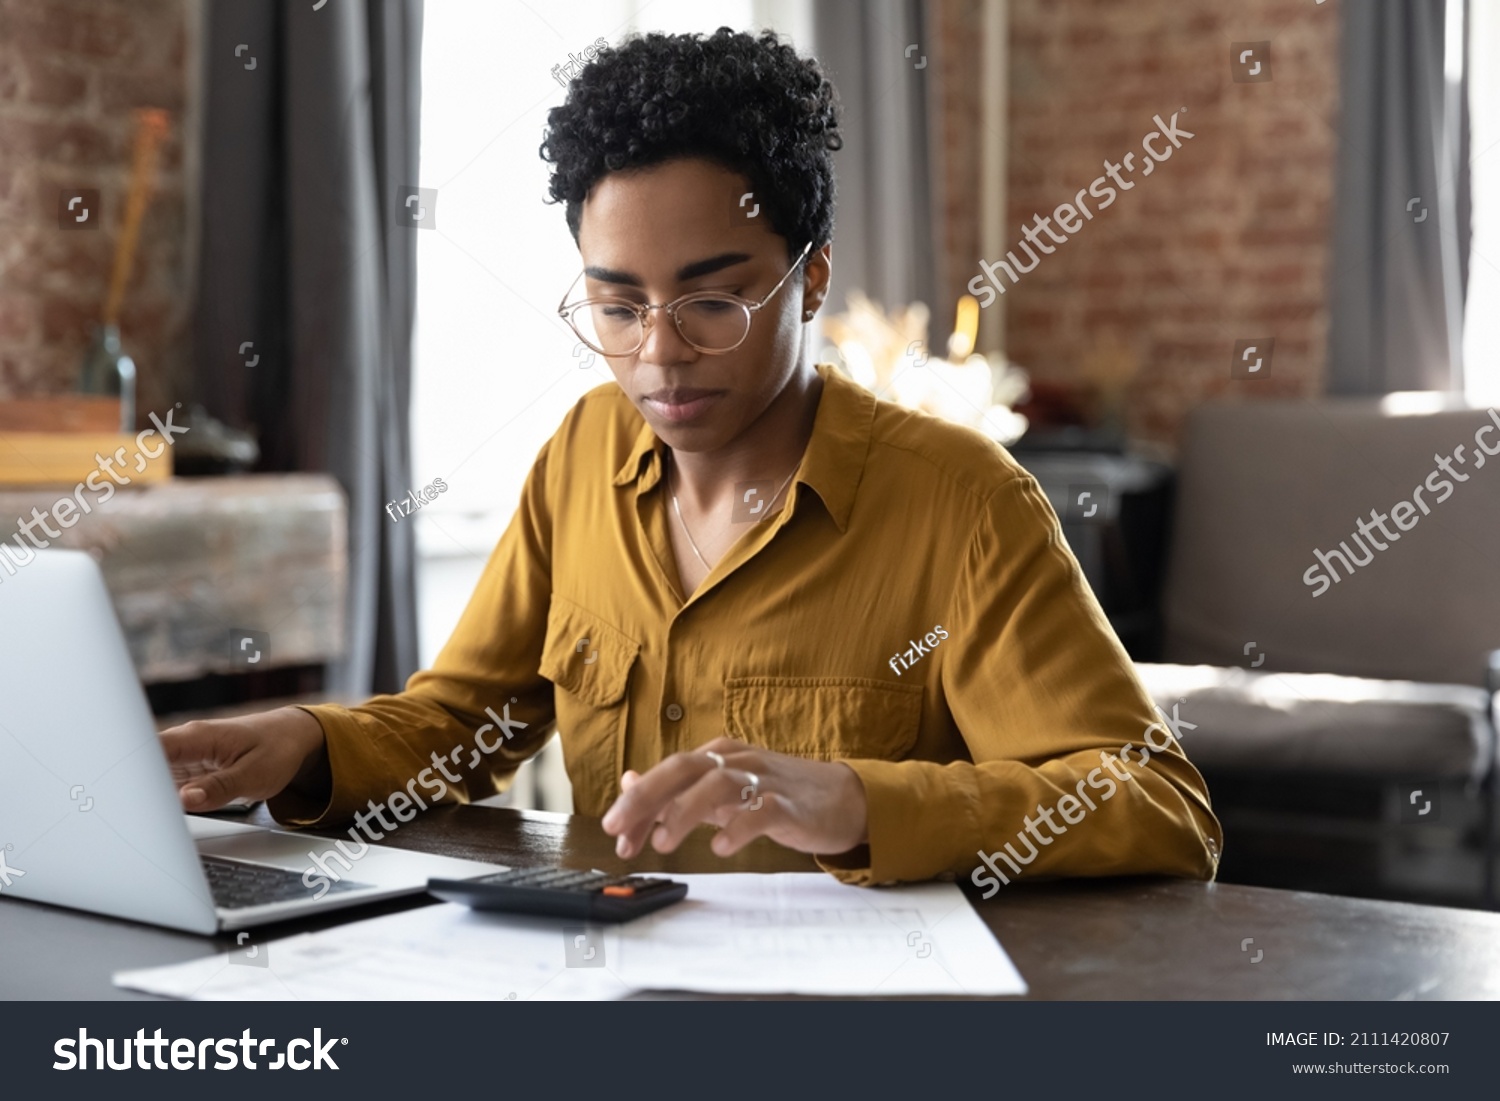 Focused millennial Black business woman calculating finance, money, using calculator, laptop computer at home workplace table, counting budget, paying bills, taxes, rent, mortgage fees #2111420807